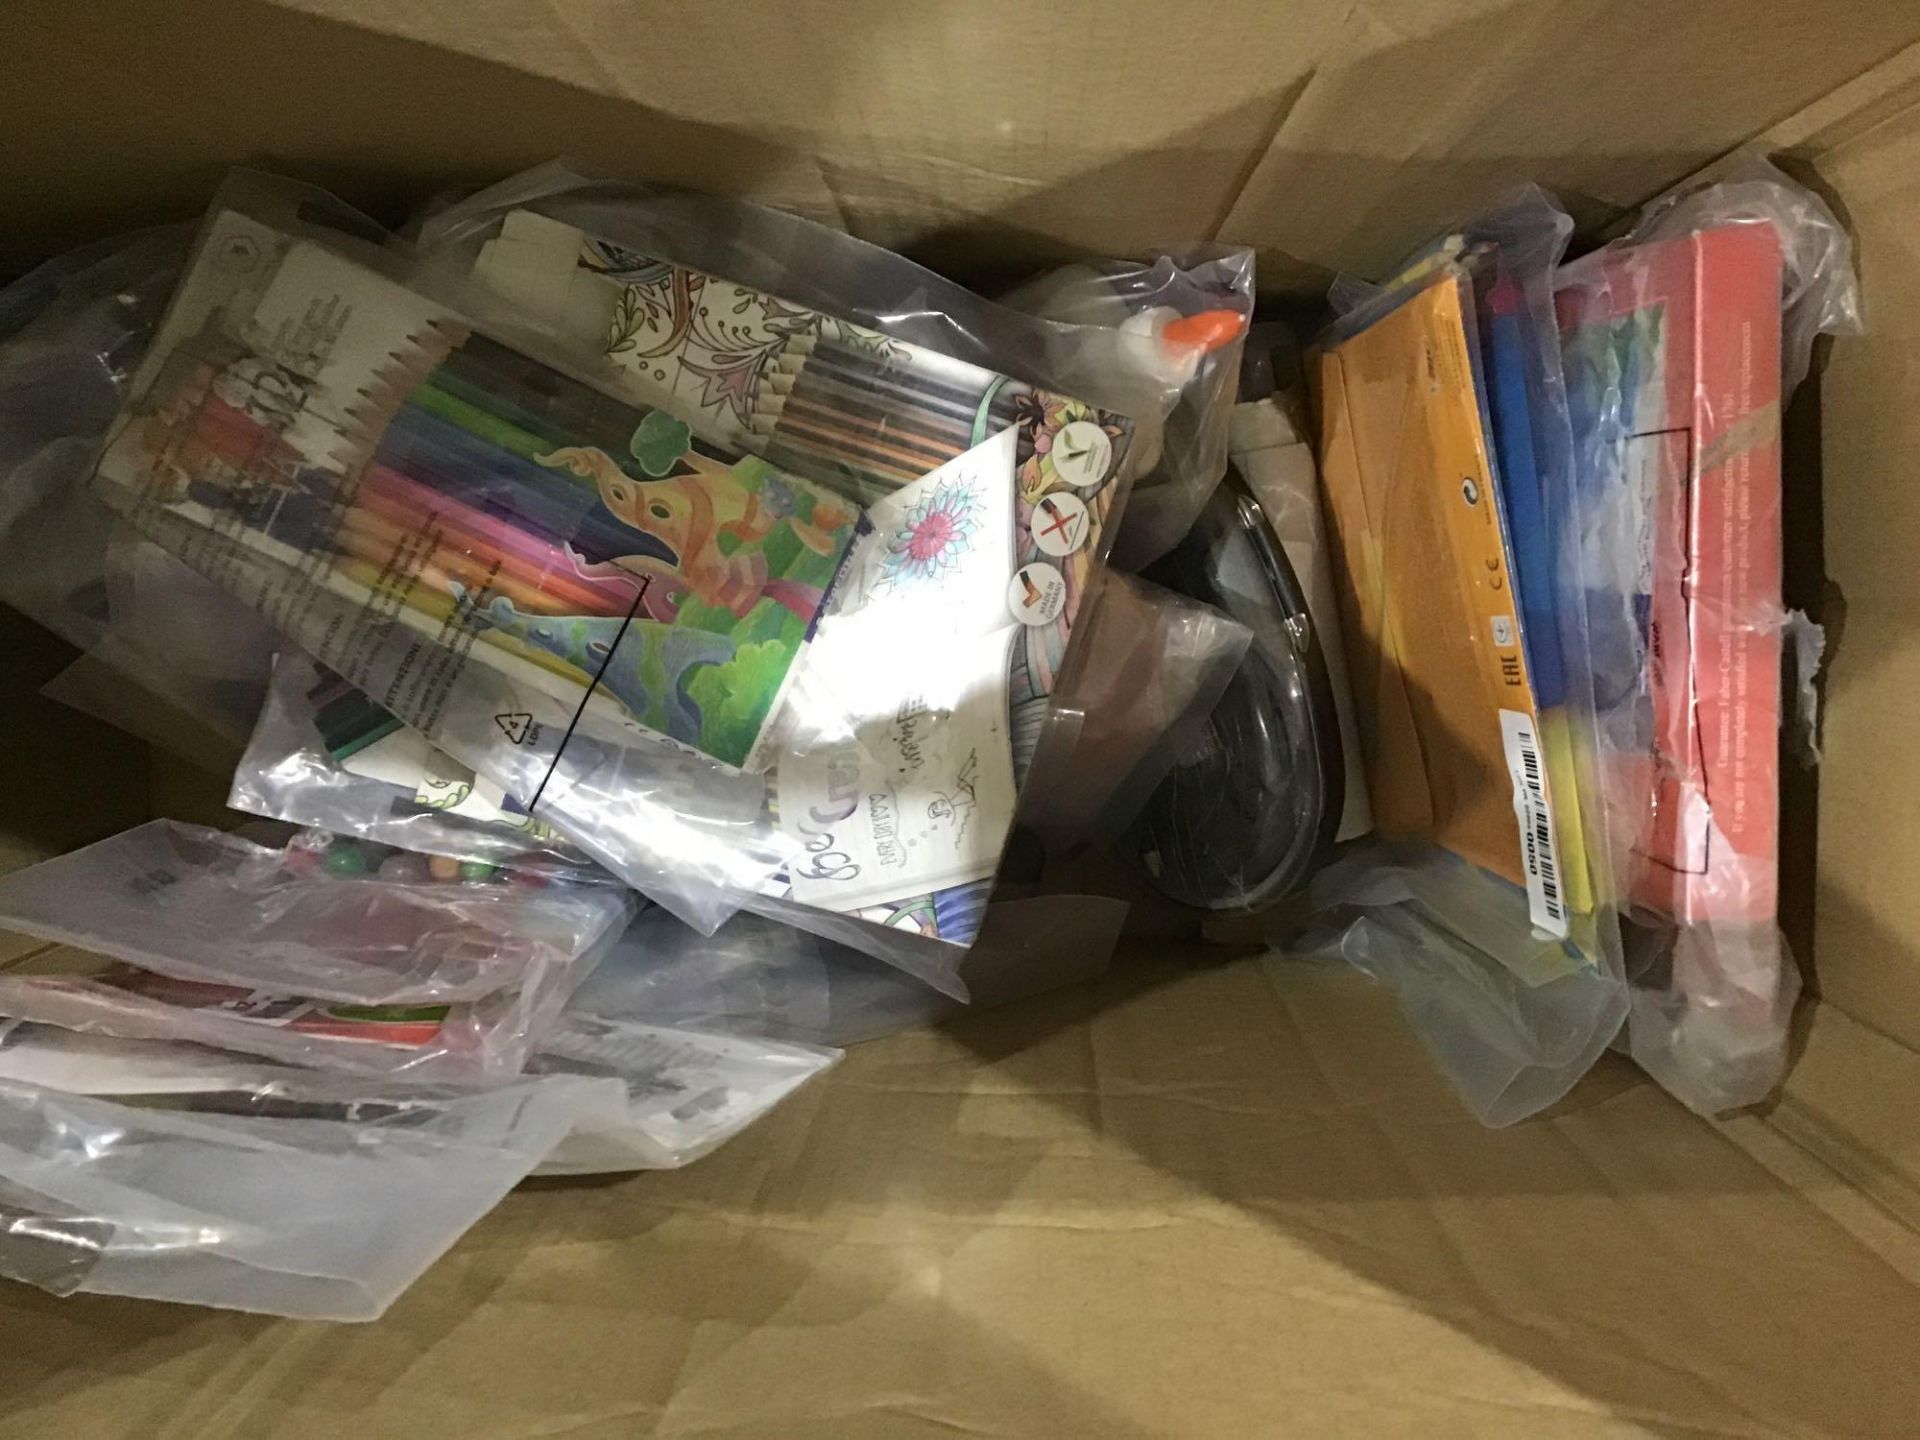 Miscellaneous Coloring Pens, Pencils, Office Supplies - Image 2 of 3